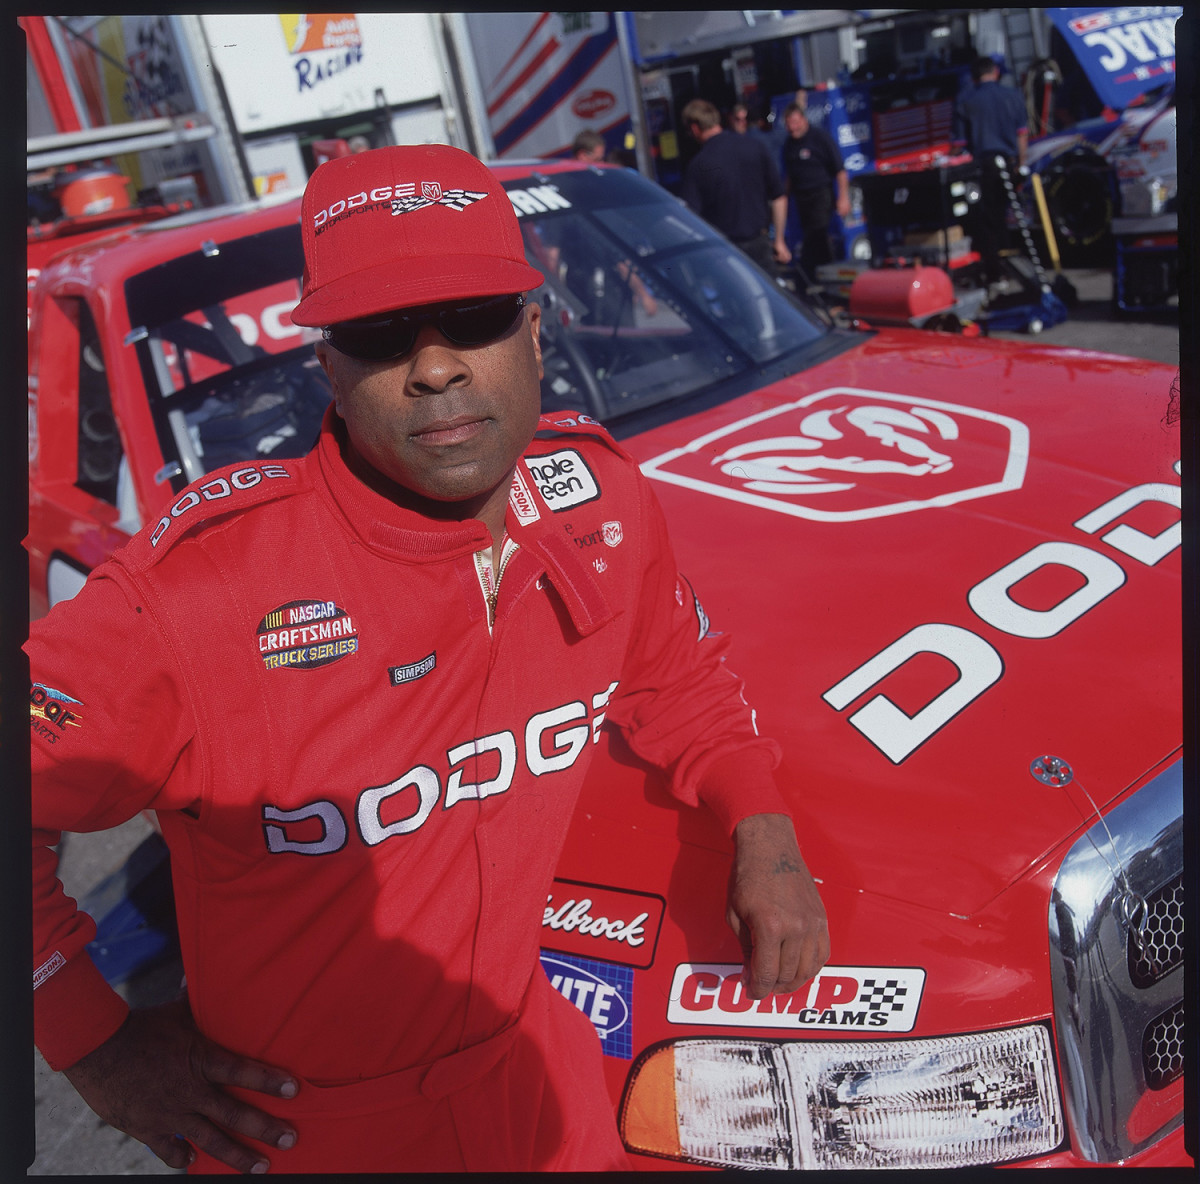 In 2001, Ribbs joined the NASCAR Craftsman Truck Series with the support of Dodge.